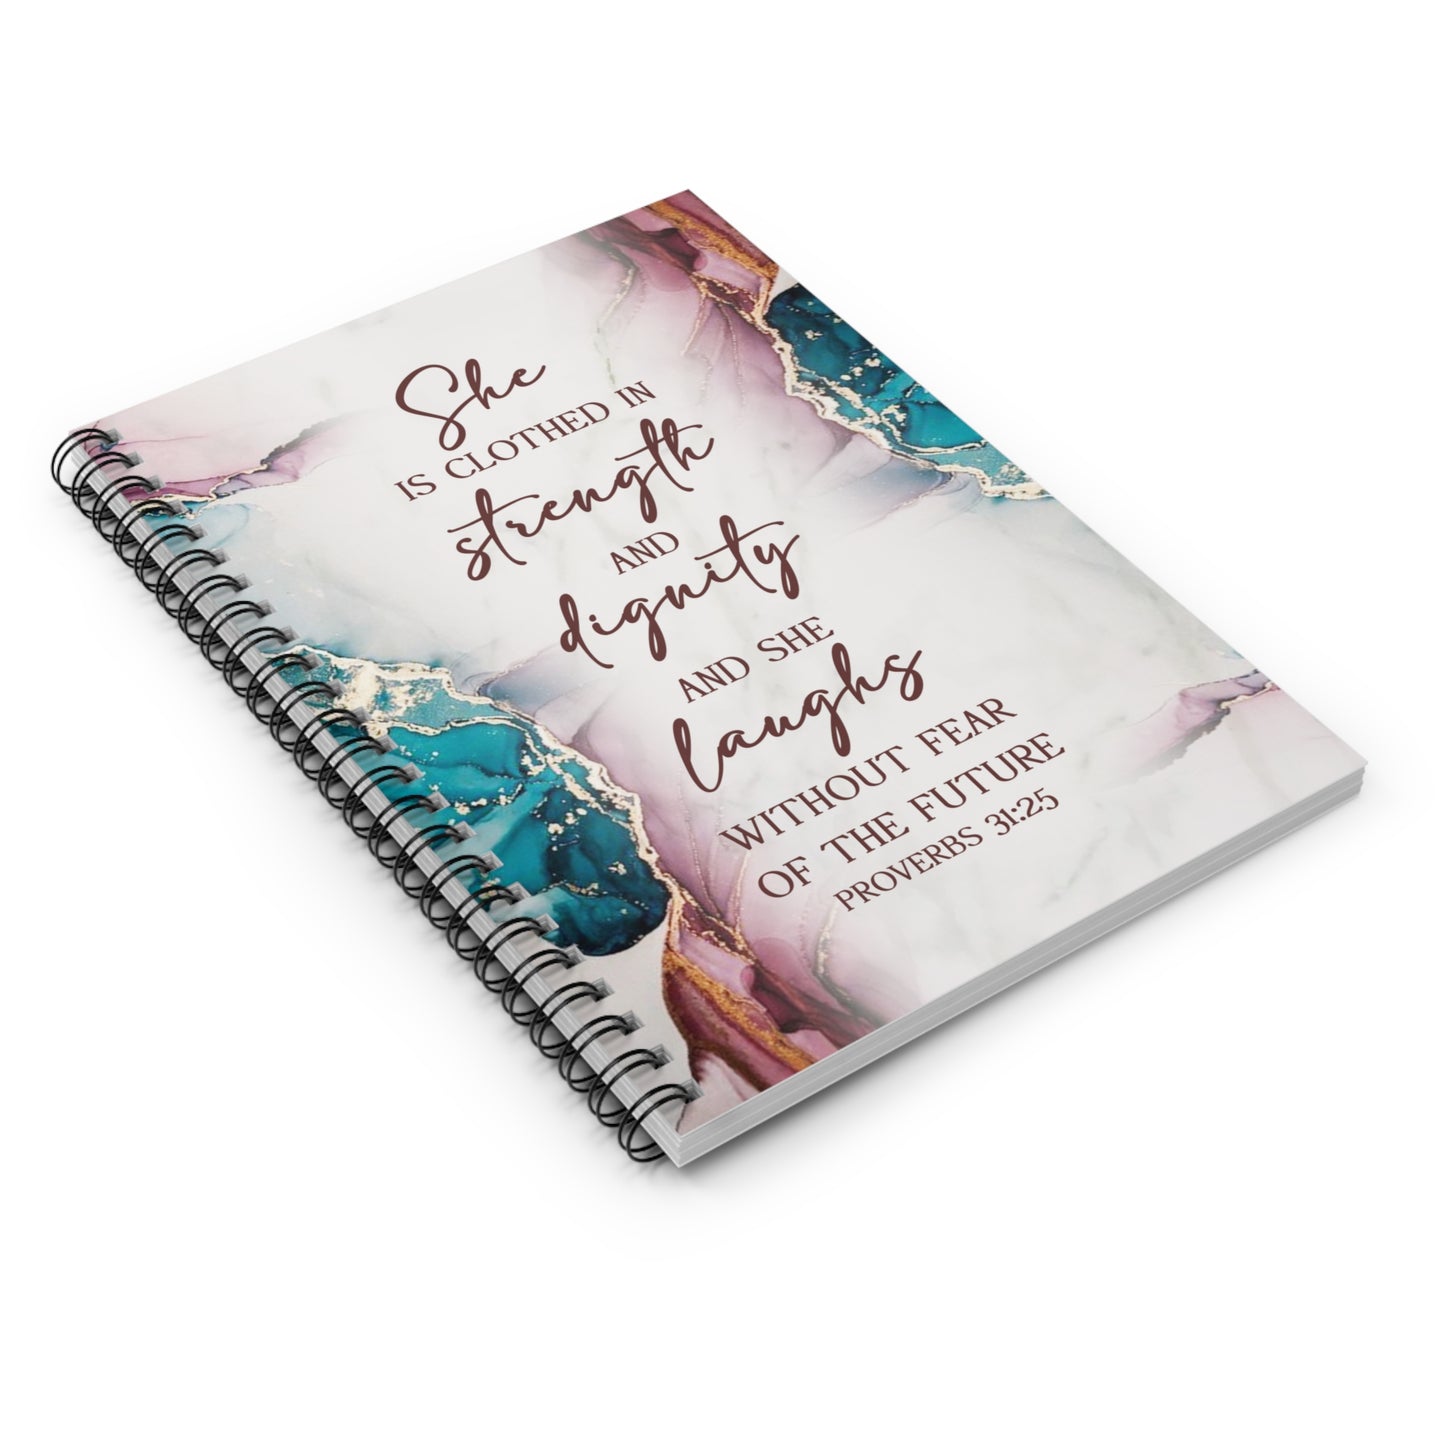 Proverbs 31:25 Spiral Notebook - Ruled Line